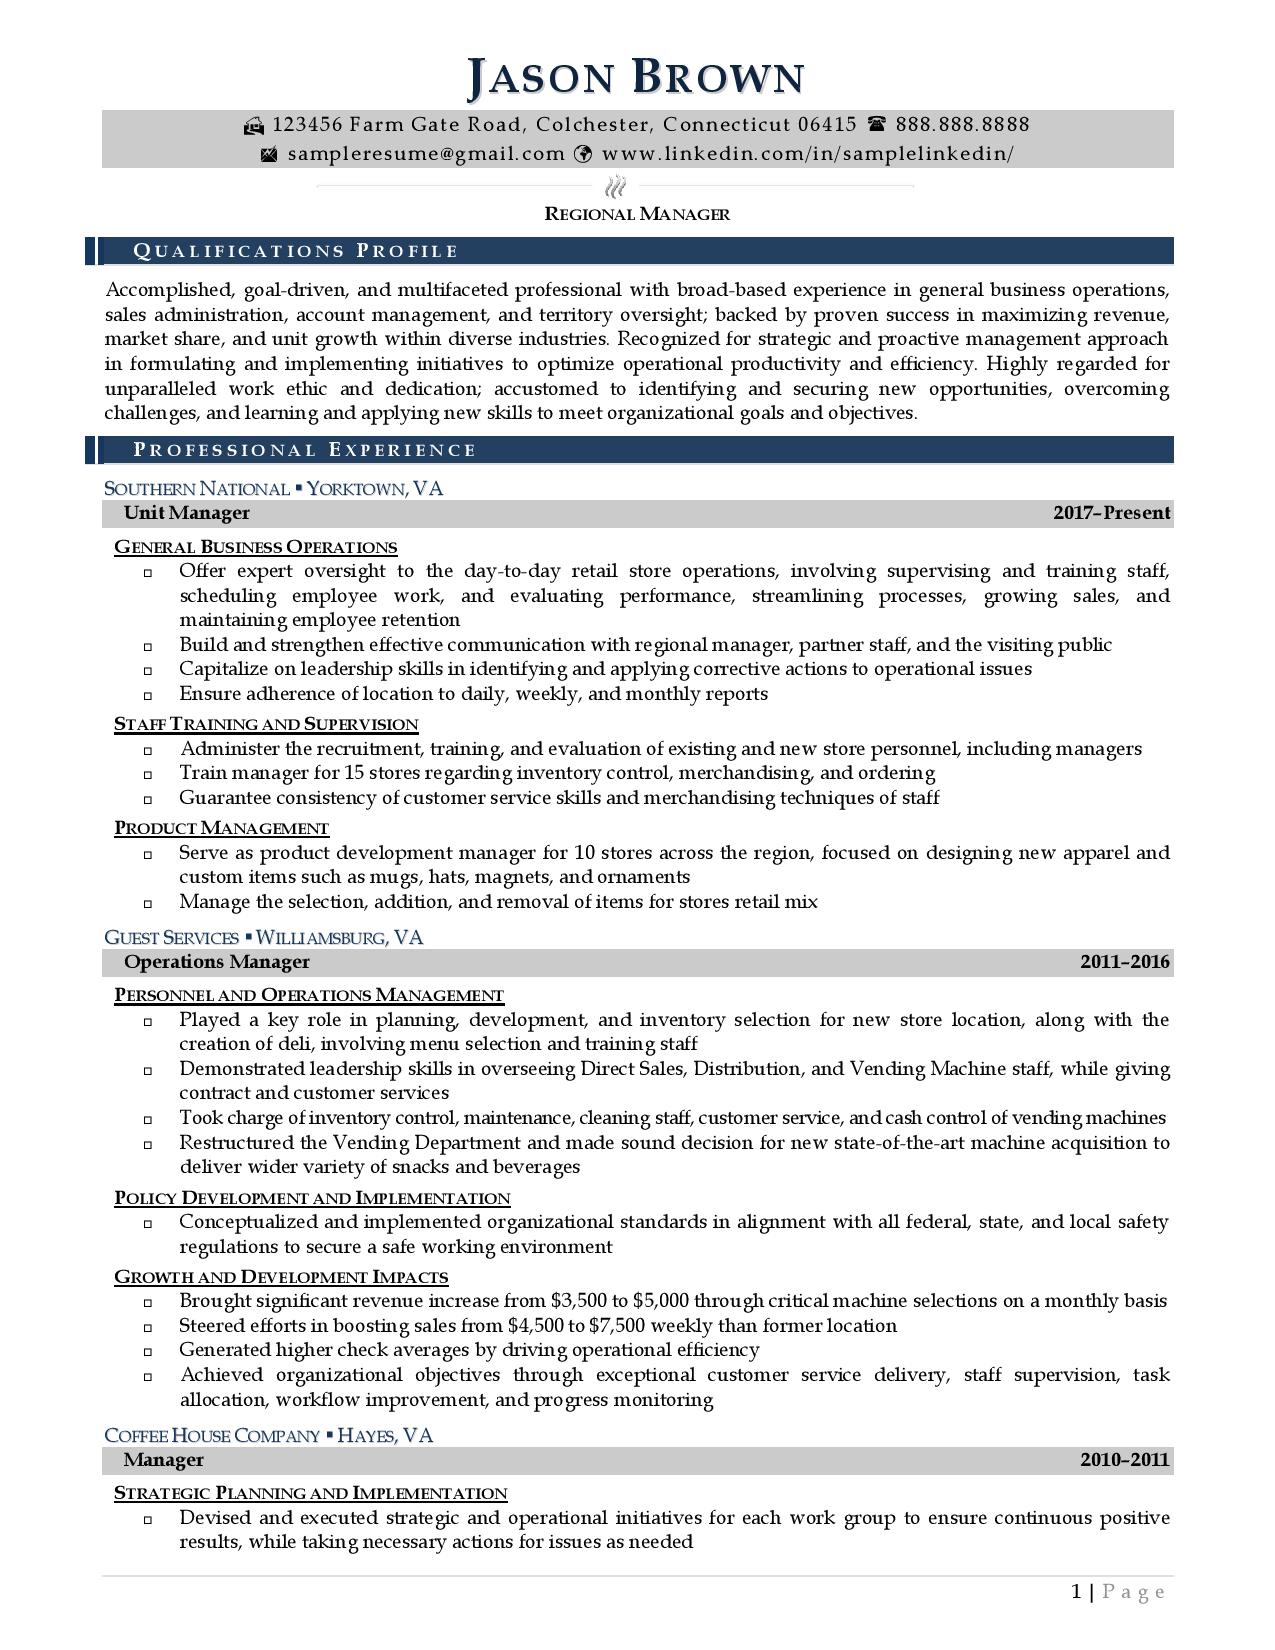 resume examples regional manager